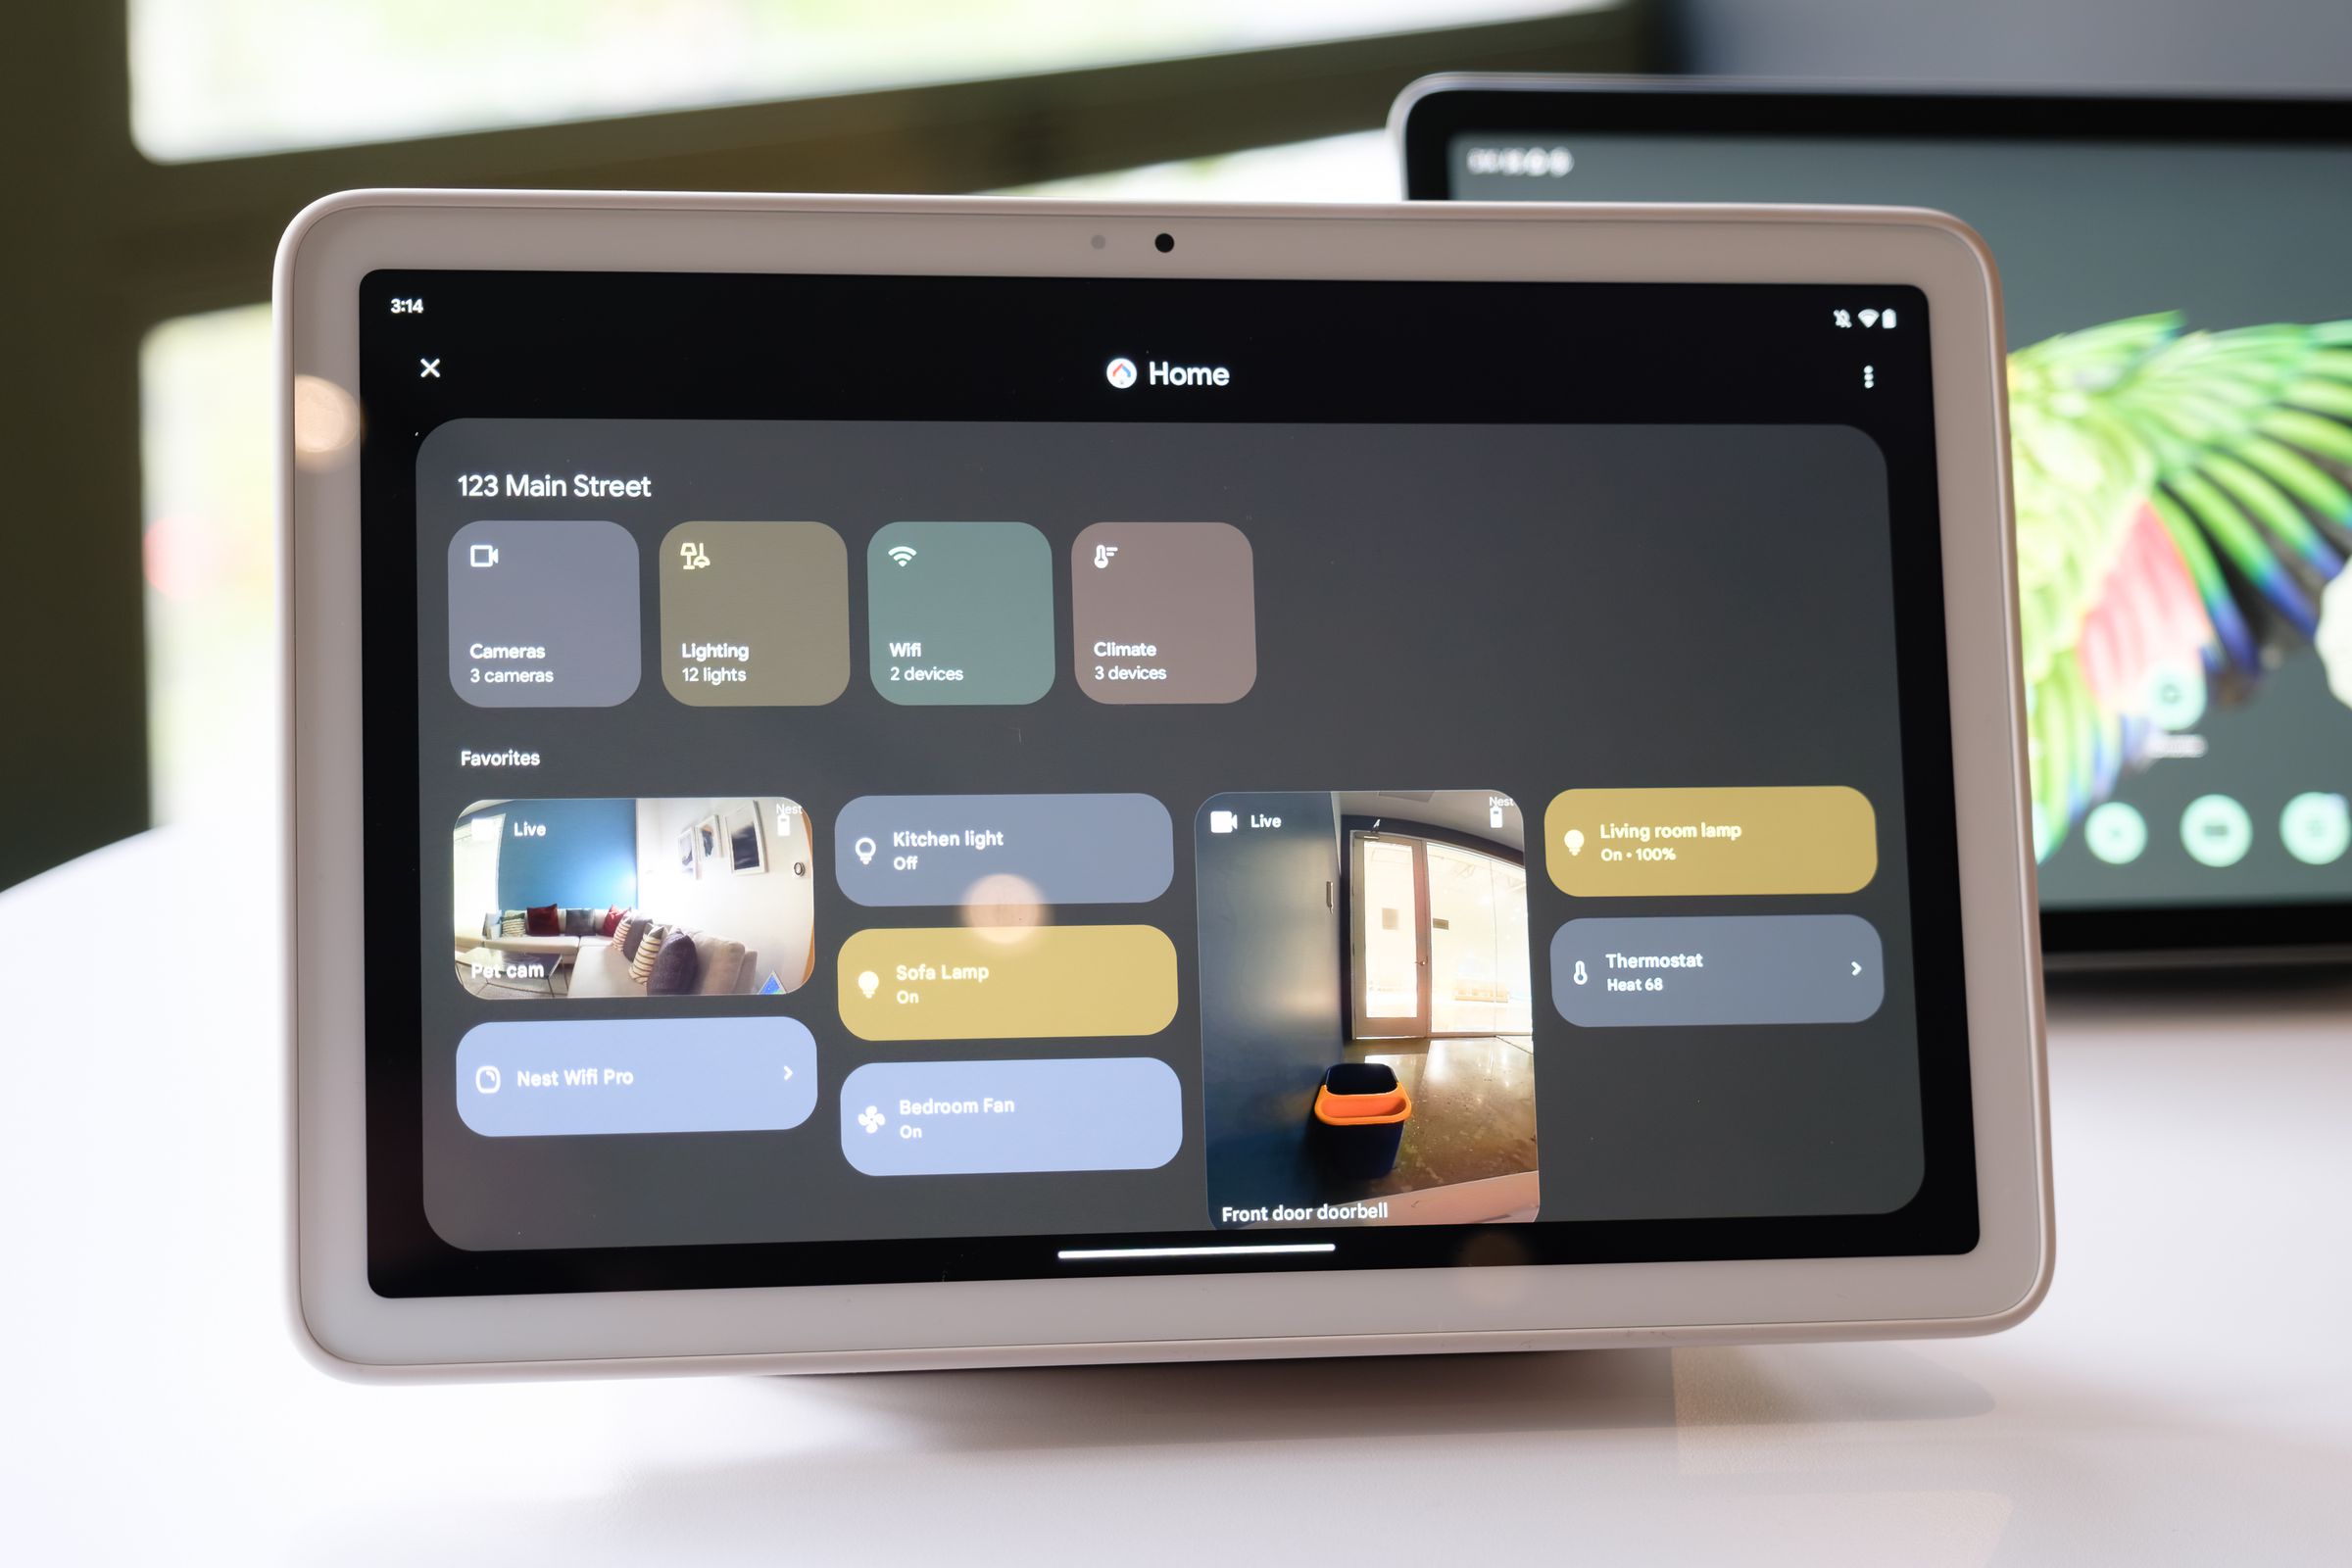 Shot of the Pixel Tablet showing Home Panel smart home information.